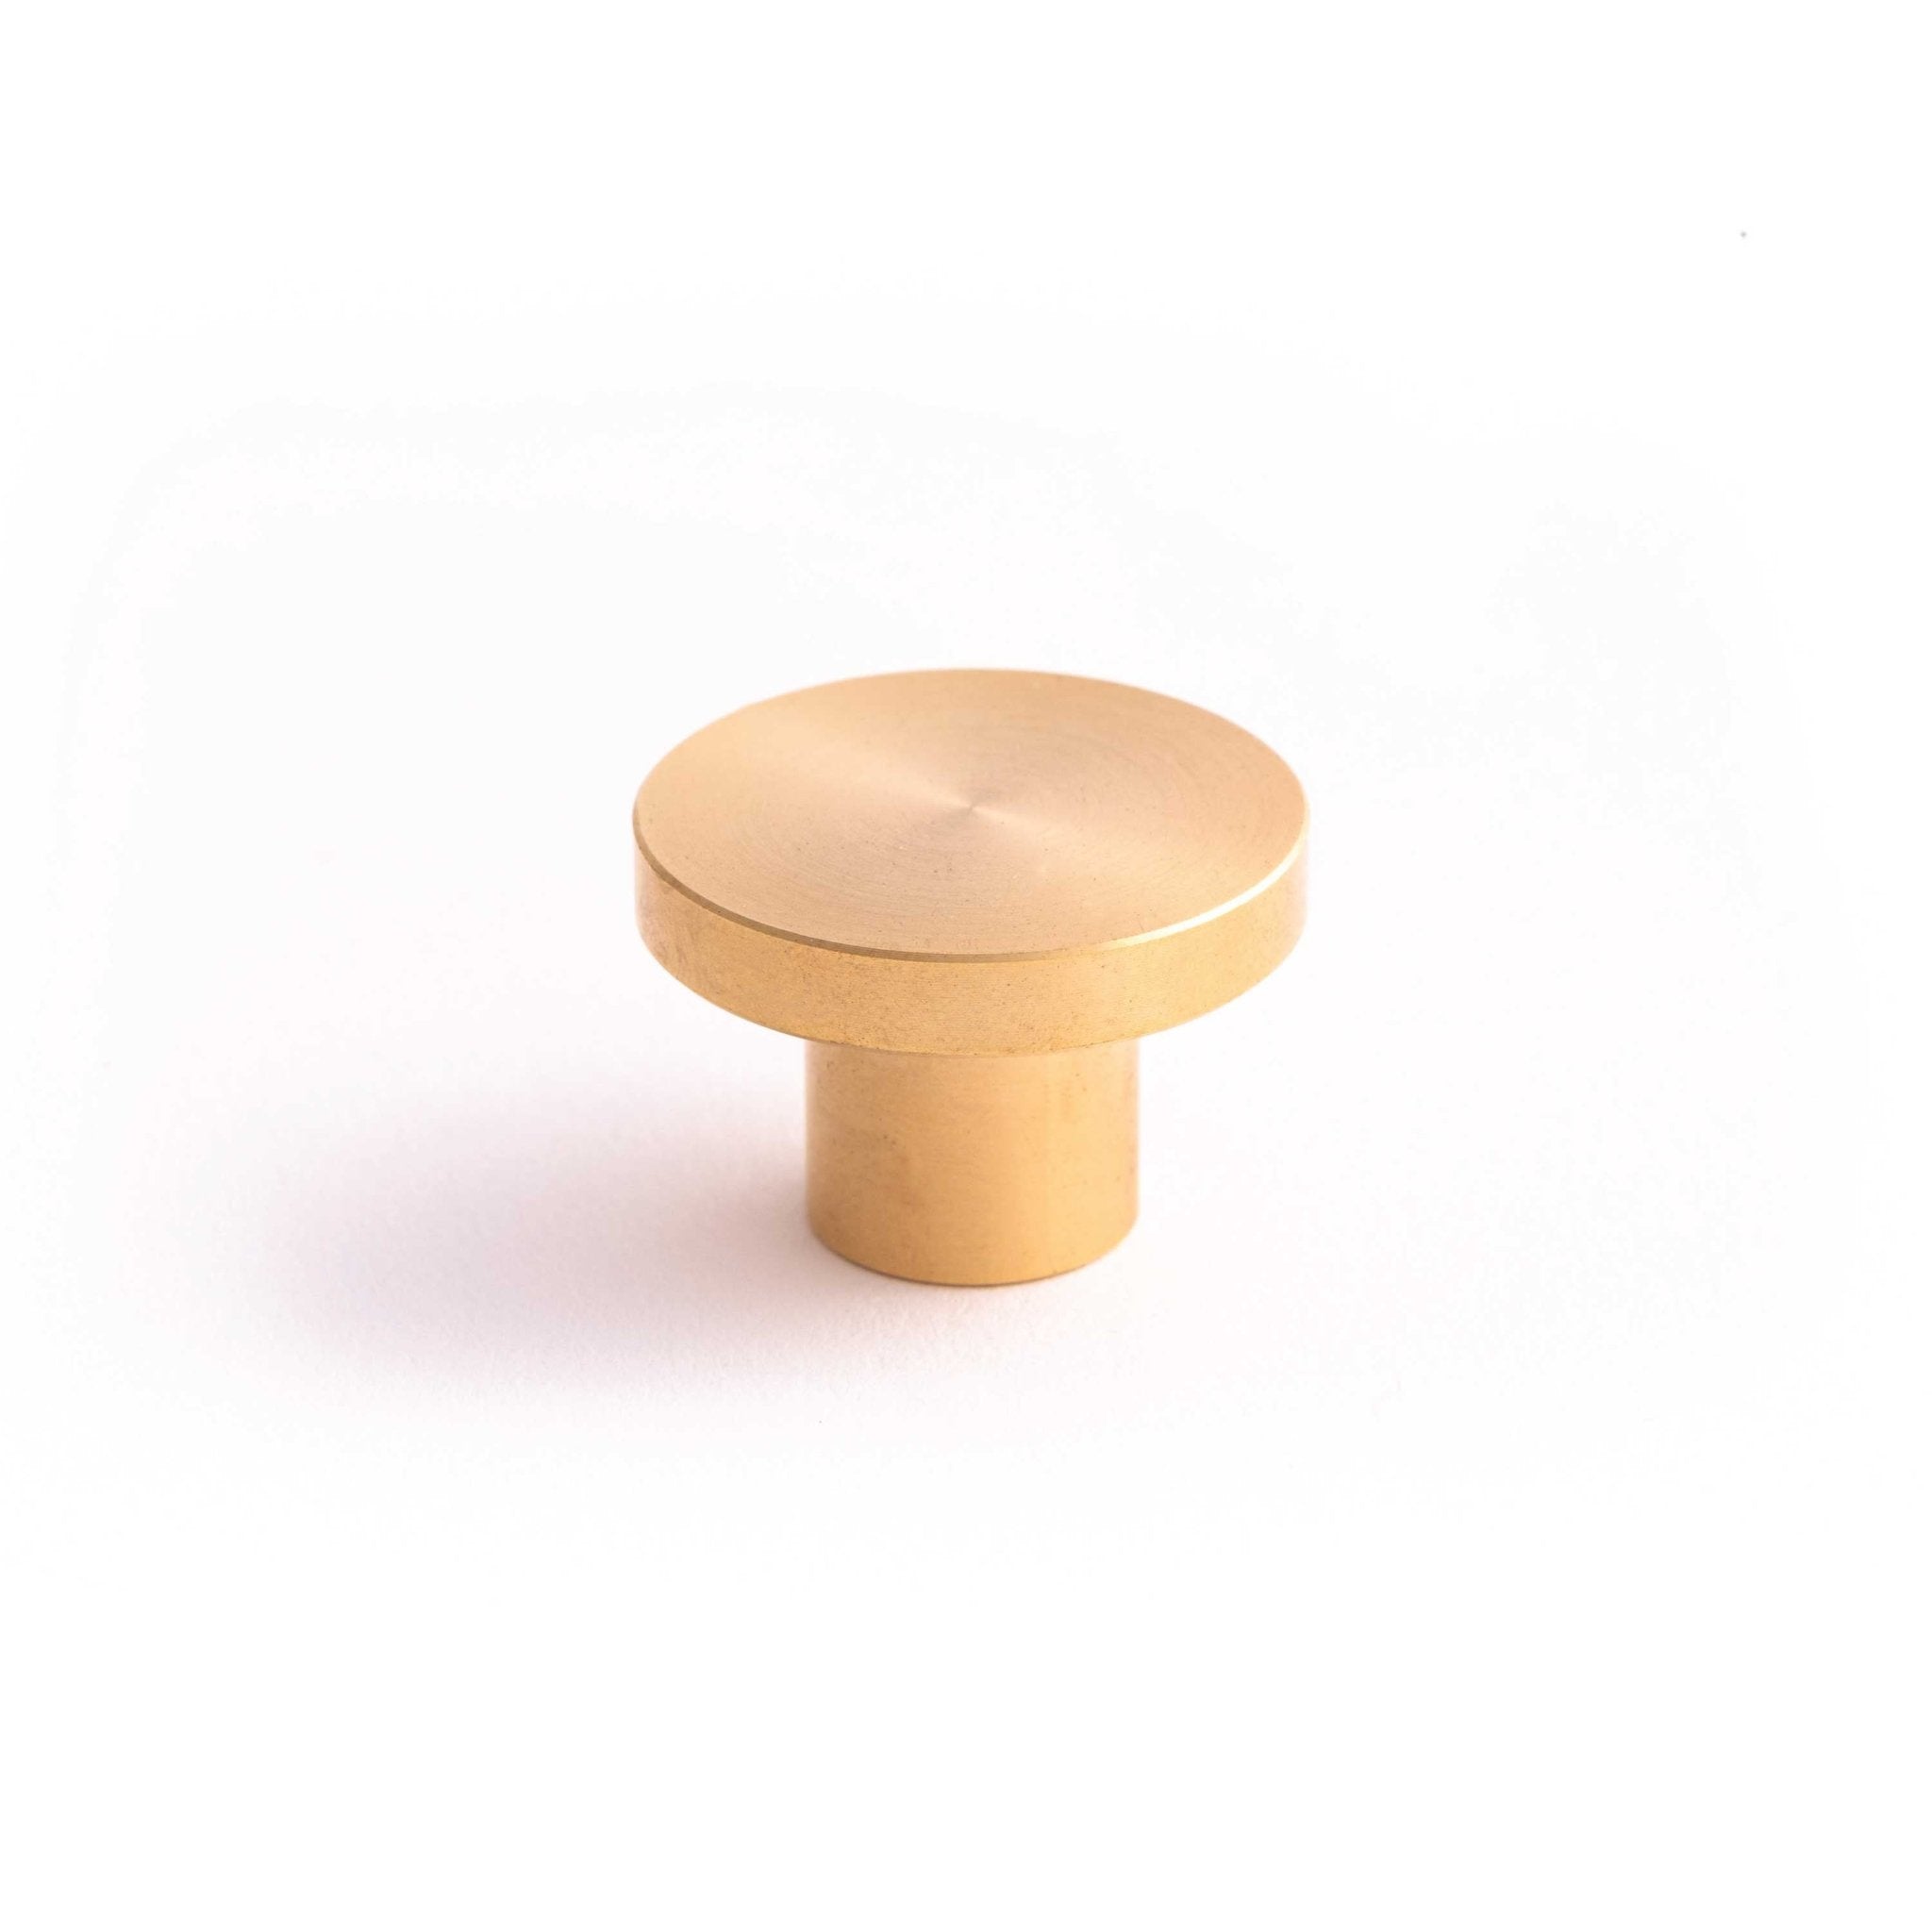 Disk 30mm Knob-Brushed Brass--The Hairpin Leg Co.